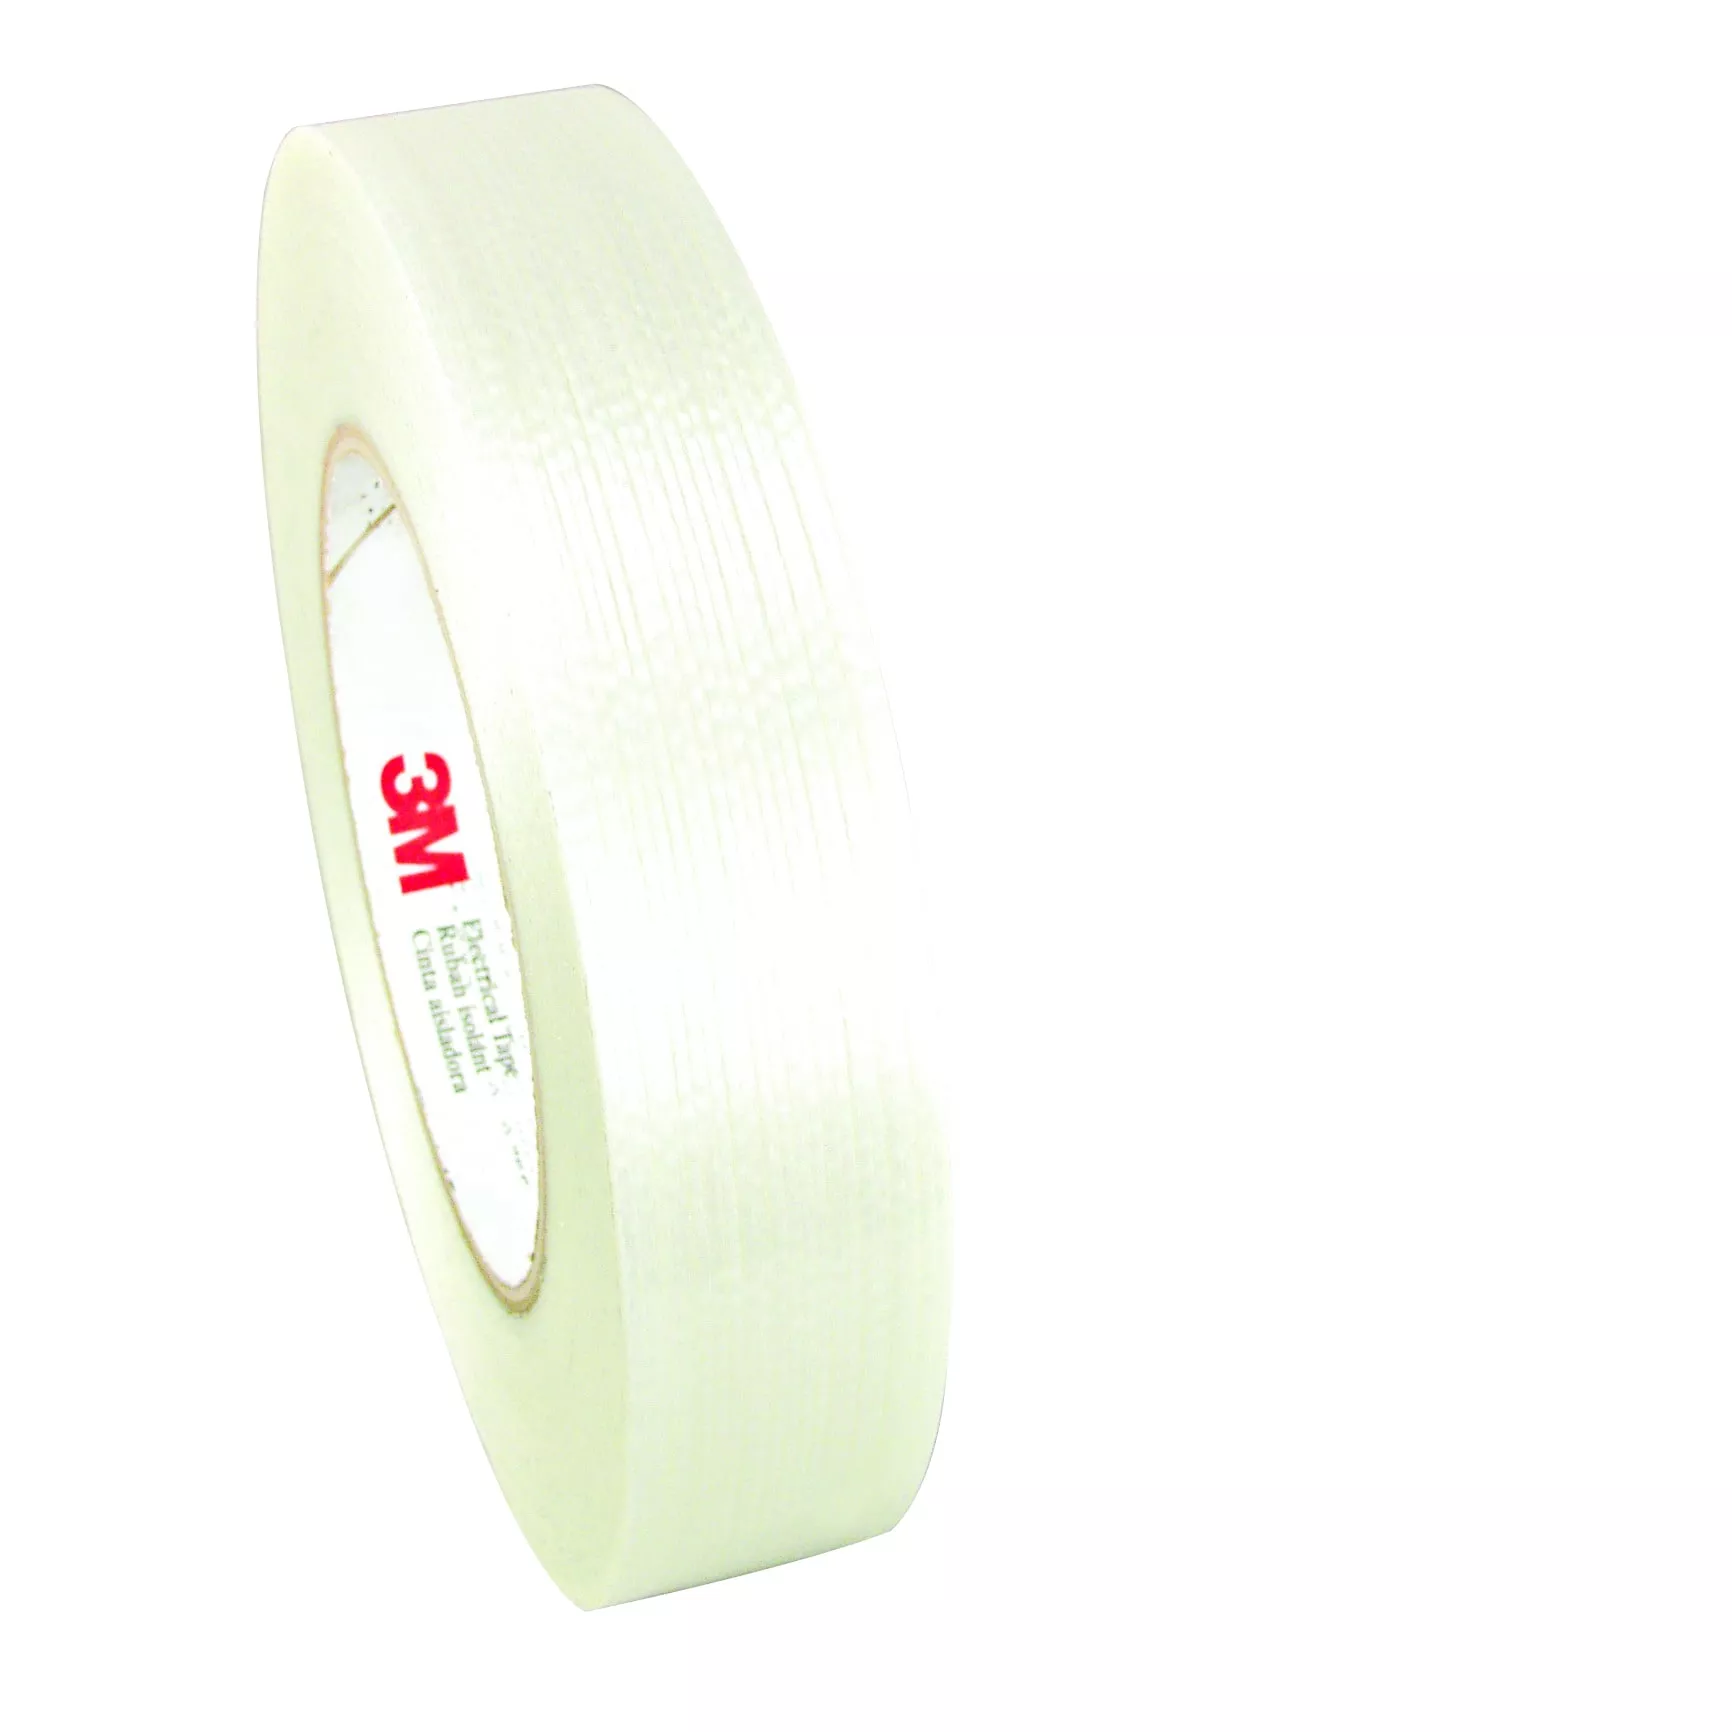 3M™ Filament Reinforced Electrical Tape 1339, 23 in x 60 yd (58.4 cm x
58.8 m), logroll 1 side trimmed